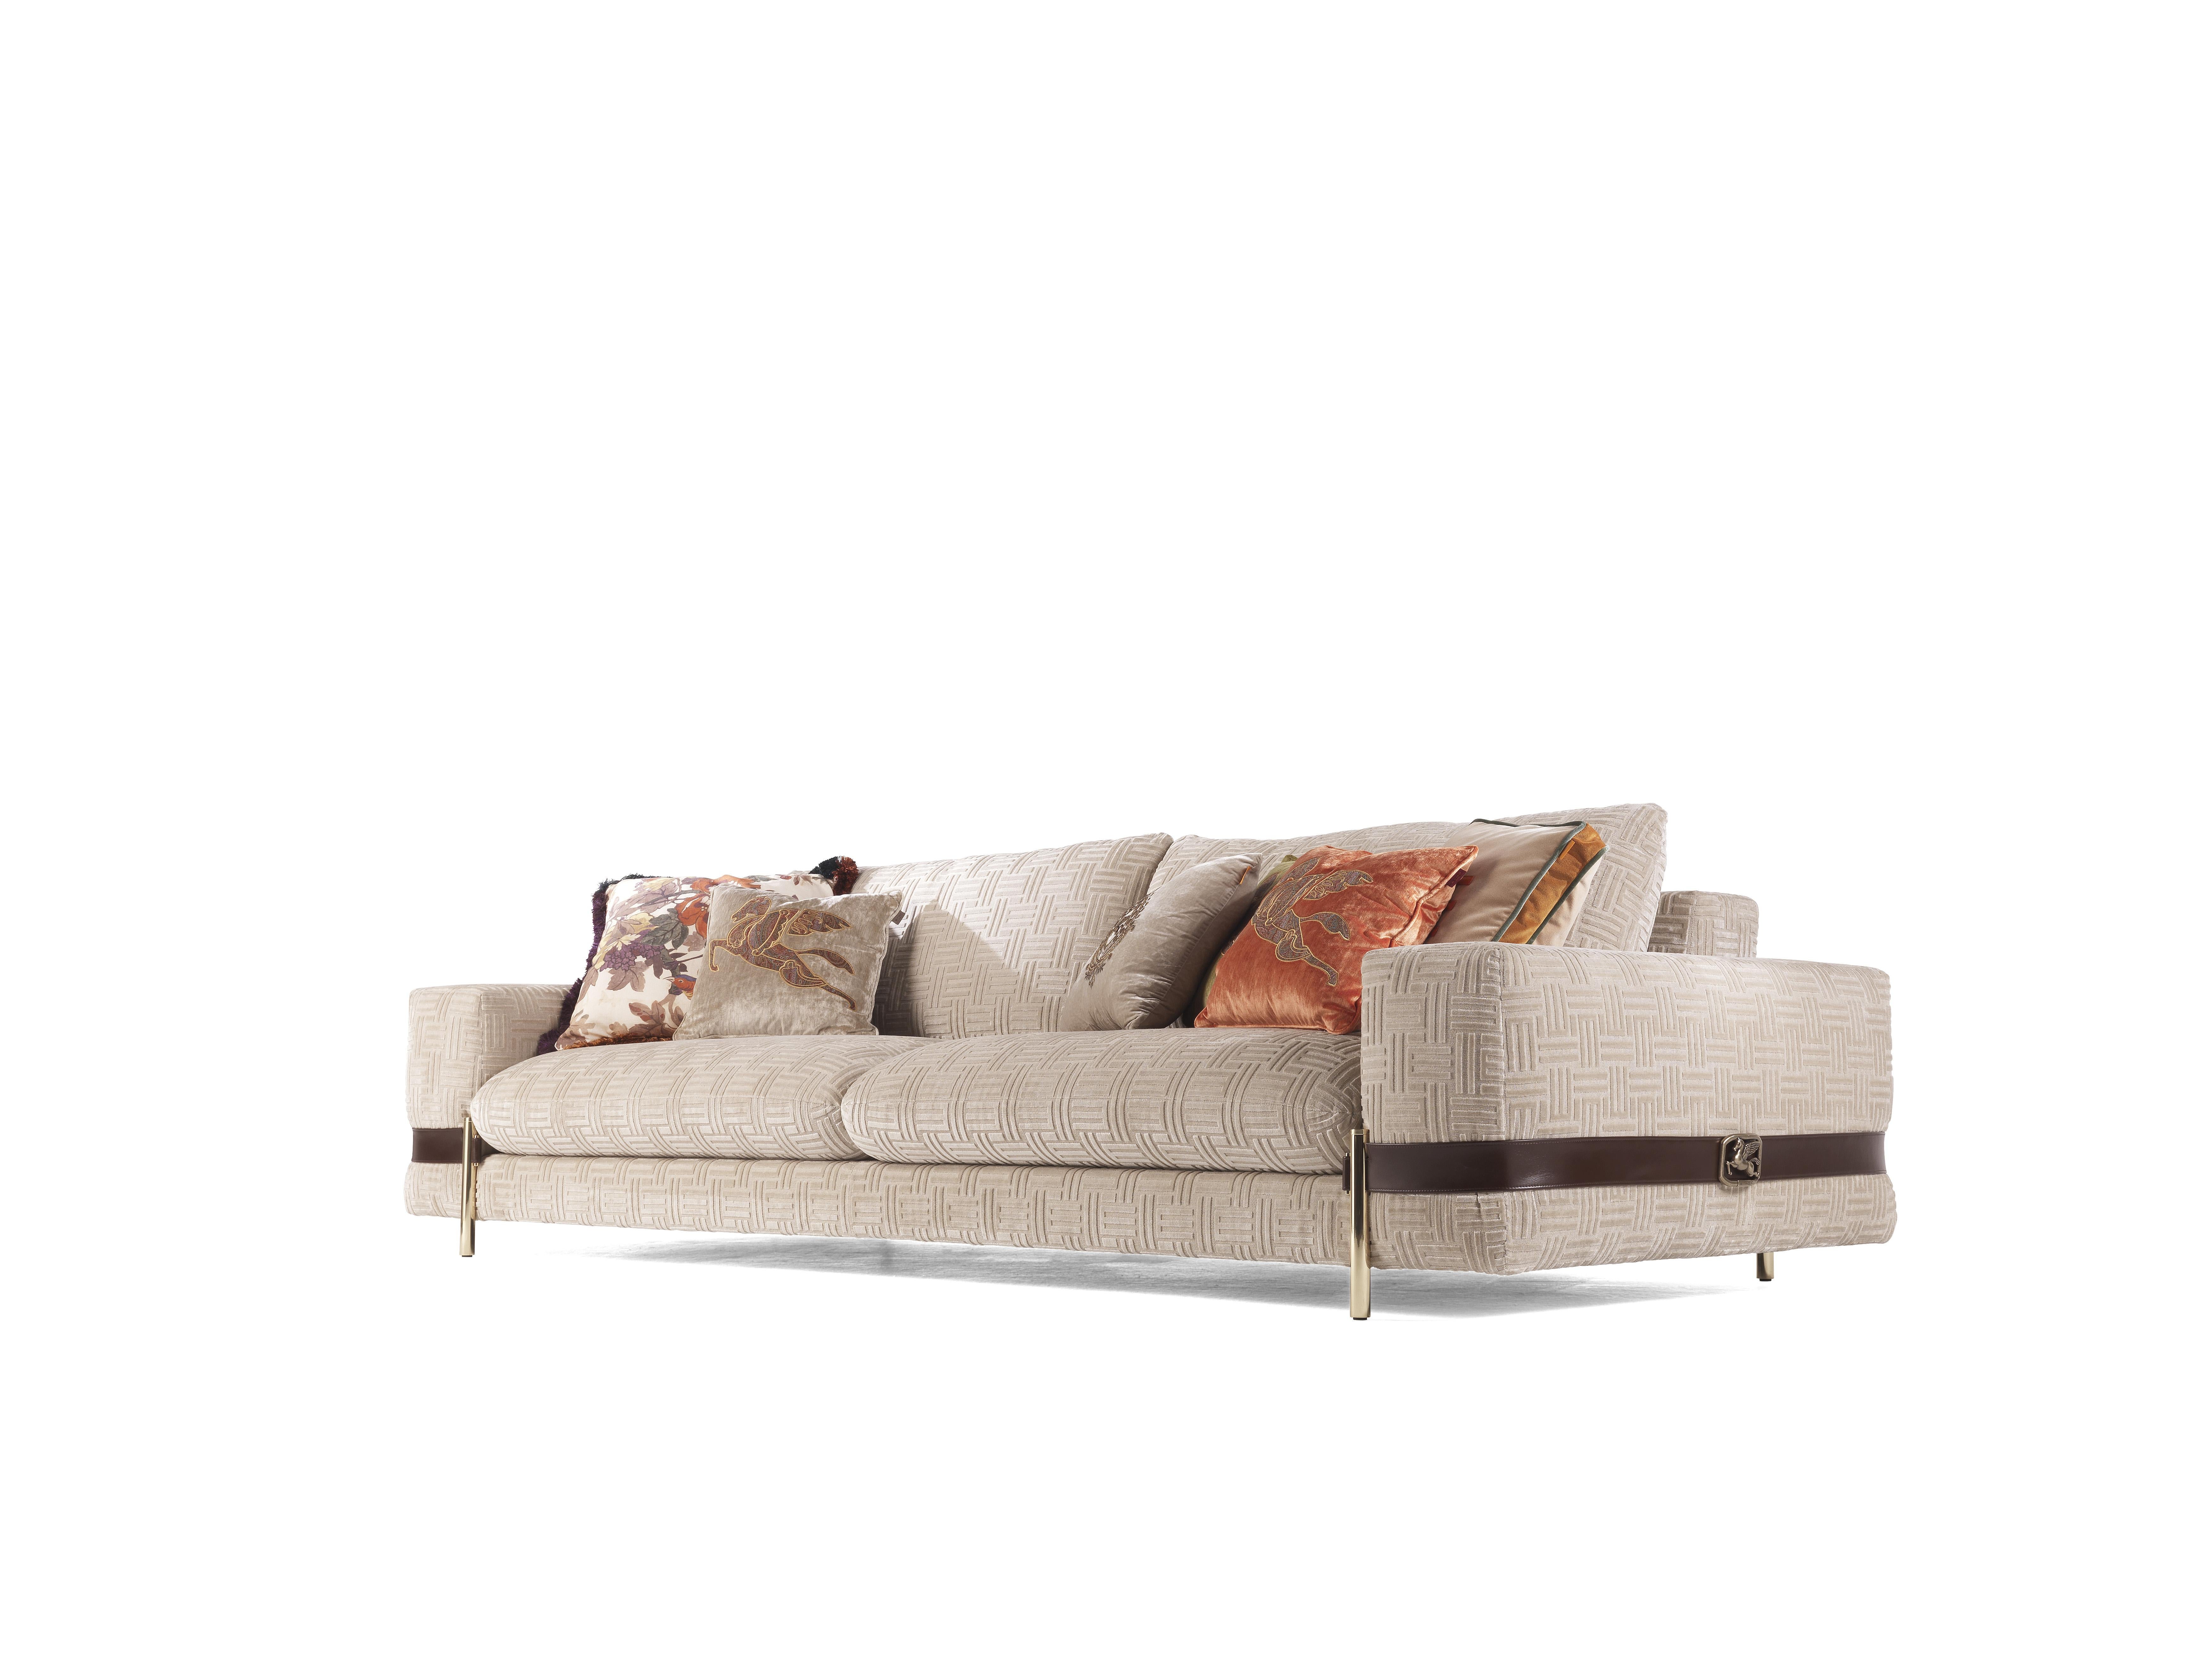 Classic, soft and elegant lines for the Madras sofa, upholstered with velvet in a soft cream shade, in line with the new interpretation that reveals ETRO Home Interiors’ most elegant and delicate facet.
Enhanced by the leather belt, a contrasting